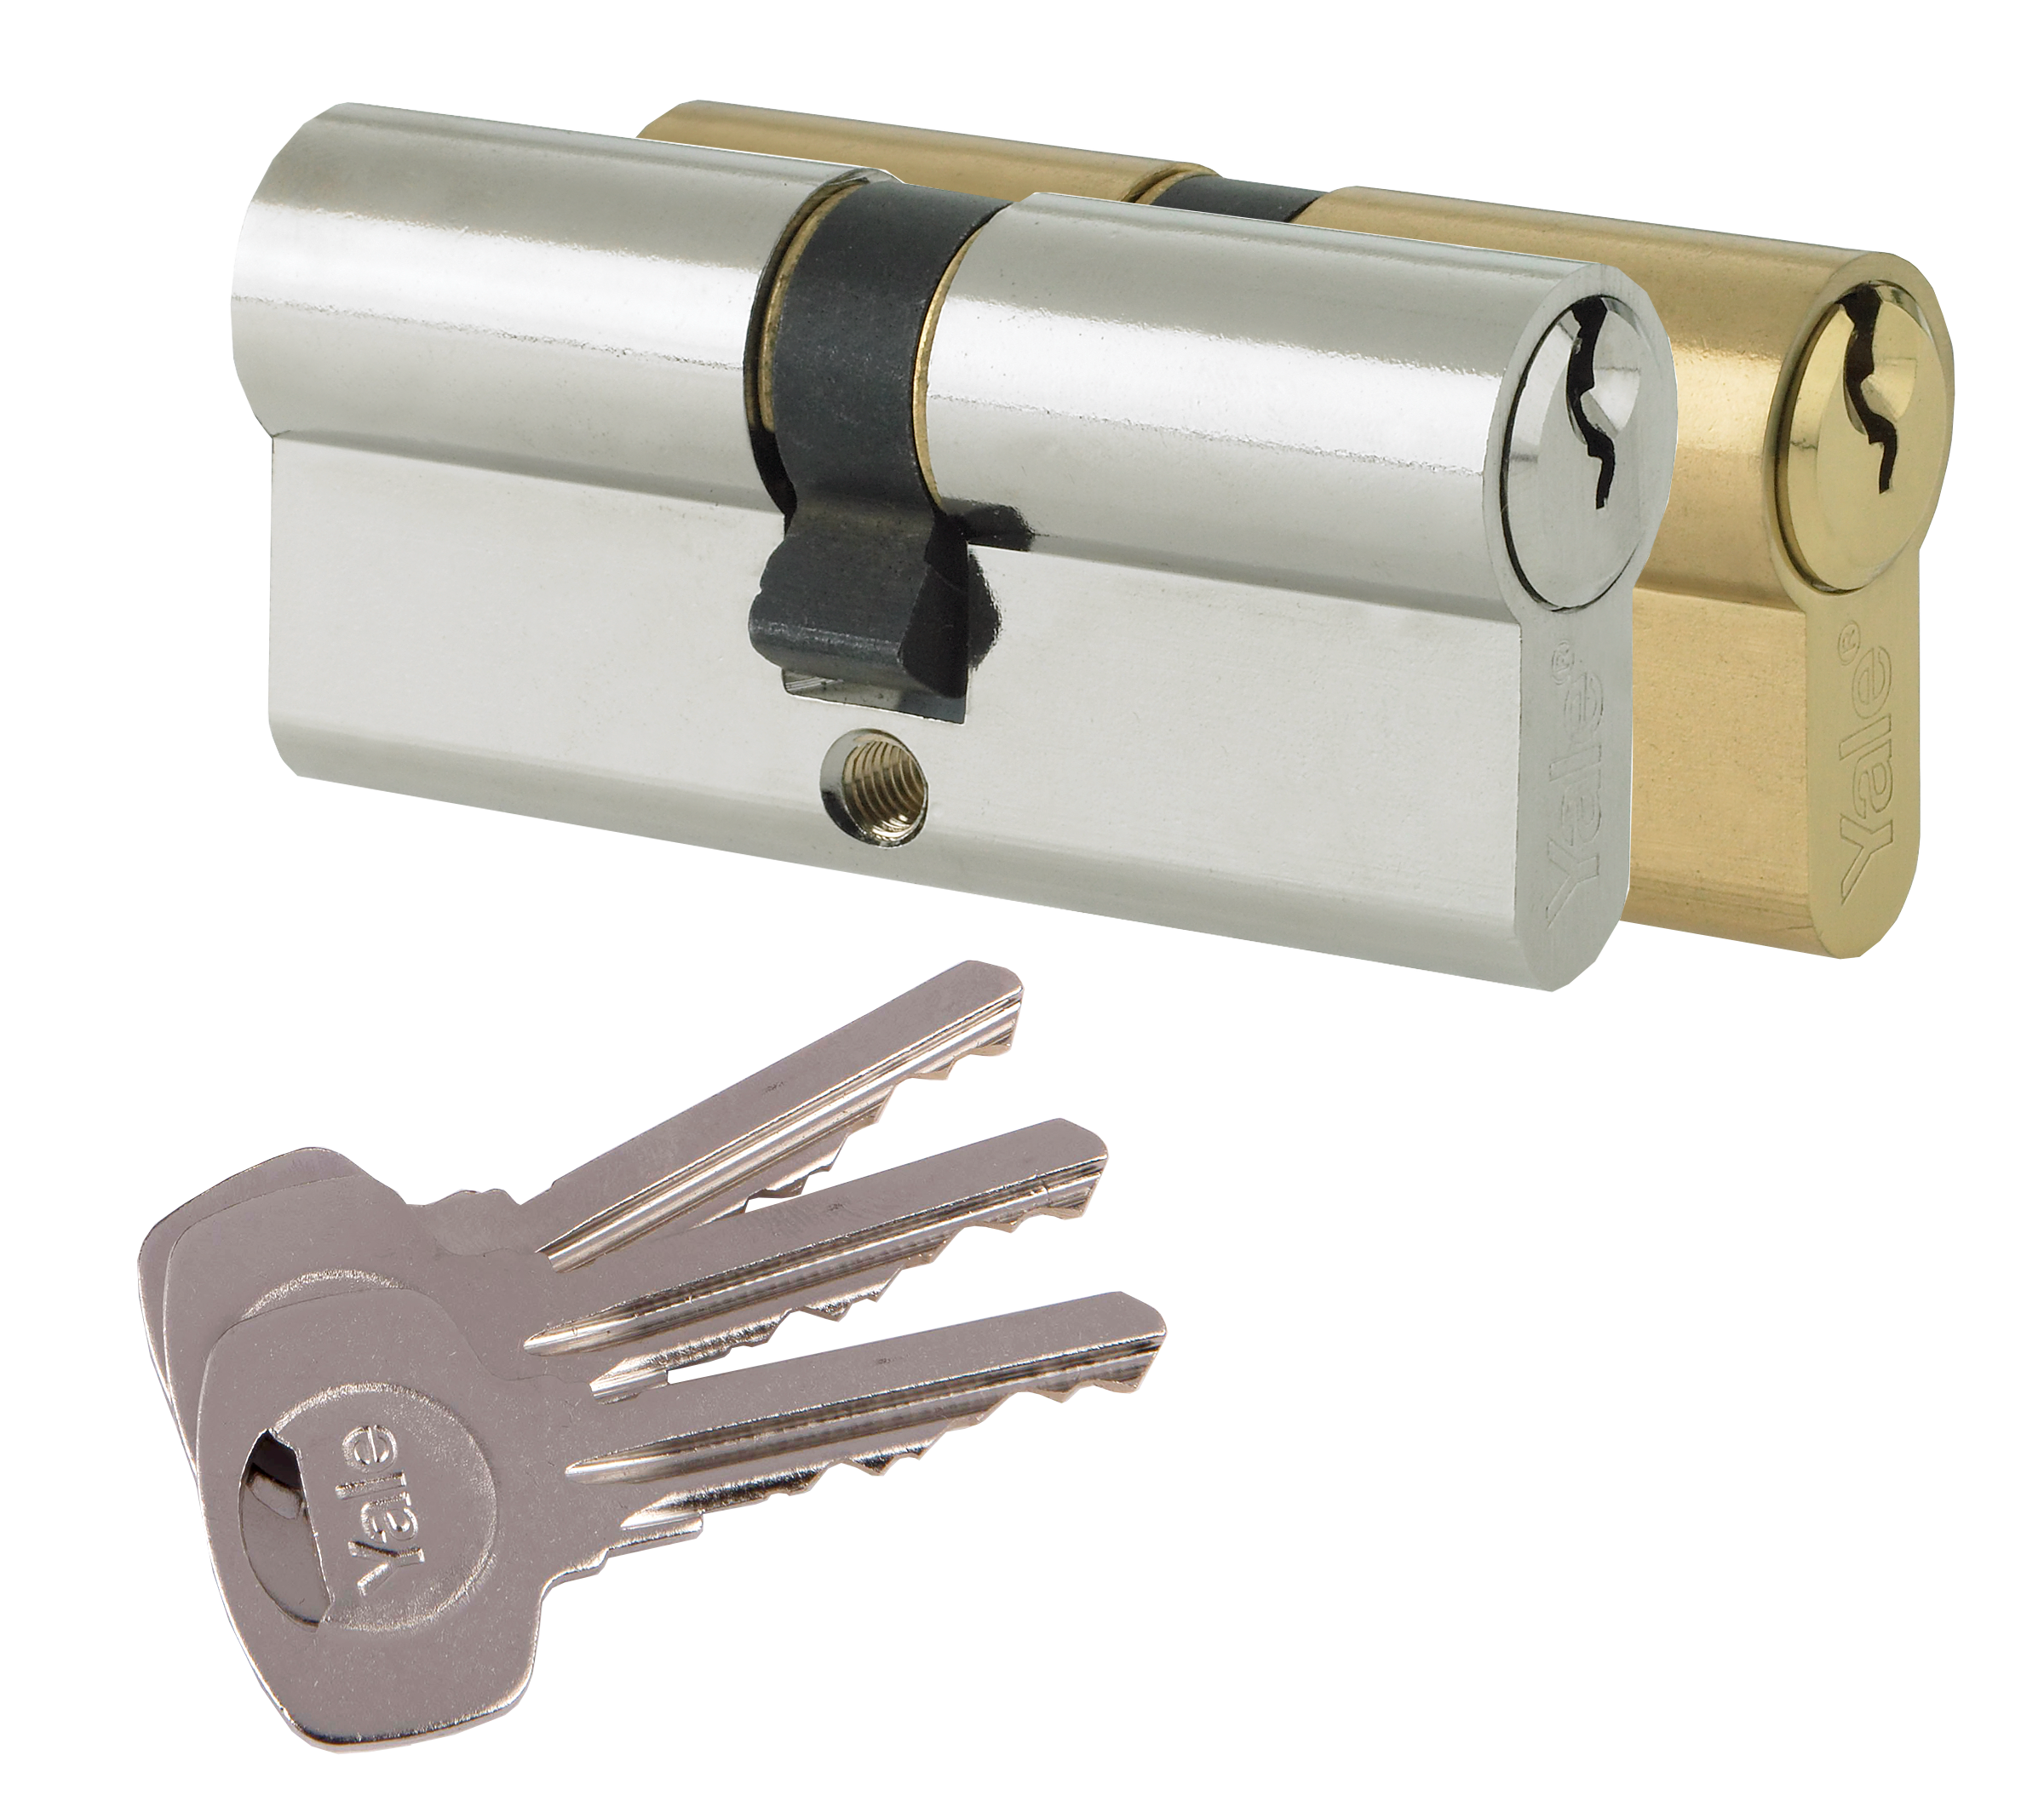 Suitable for All Door Types Visi Packed 85 mm Yale PKM3540-NP Kitemarked 1 Star Superior Euro Double Cylinder High Security Nickel Finish 35:10:40 3 Key Supplied